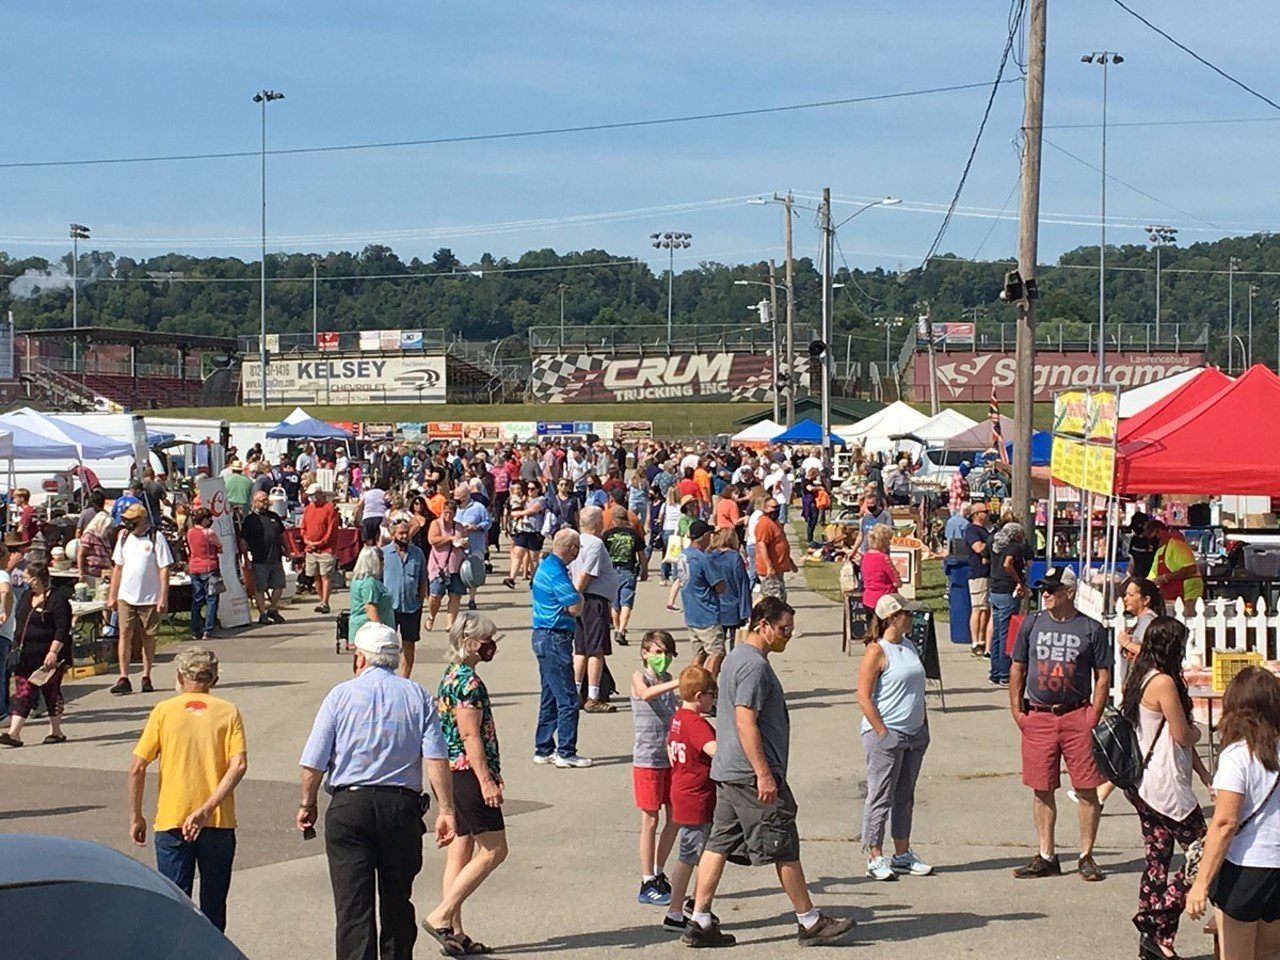 Tri-State Antique Market
When: July 7 from 7 a.m.-3 p.m.
Where: Lawrenceburg Fairgrounds, Lawrenceburg
What: Huge antique and vintage-only market
Who: The Lawrenceburg Antique Show
Why: An outdoor antique market is the epitome of indulging in a summer season event.